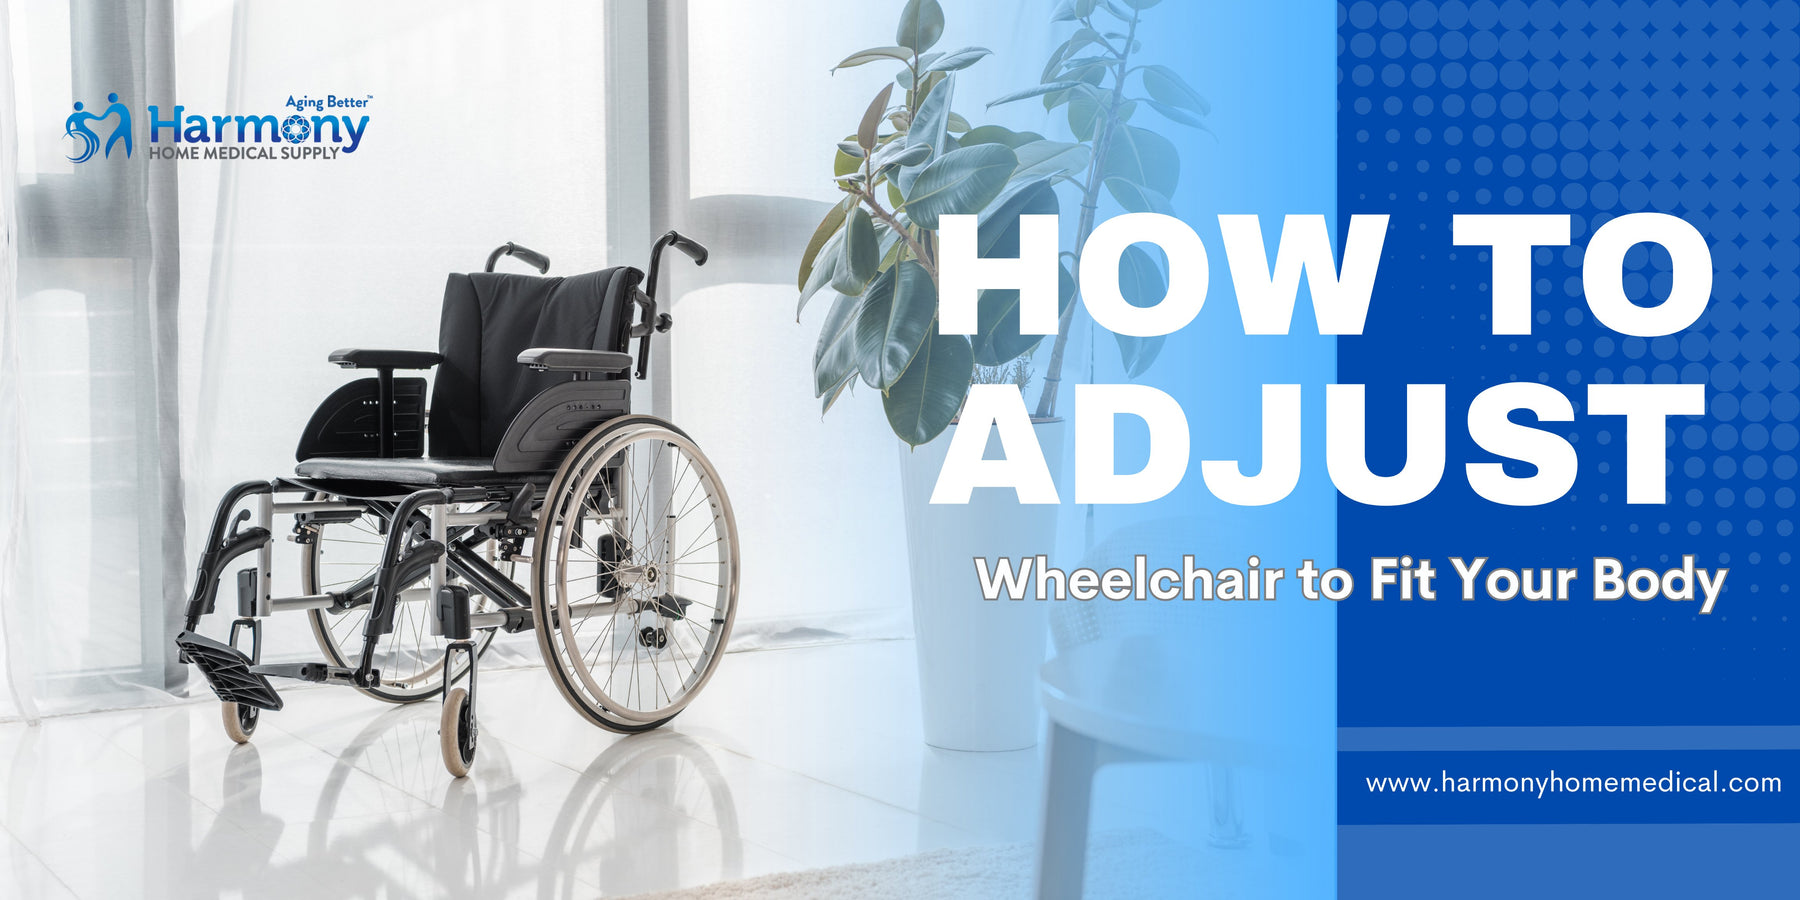 How to Adjust Your Wheelchair to Fit Your Body - Harmony Home Medical Supply